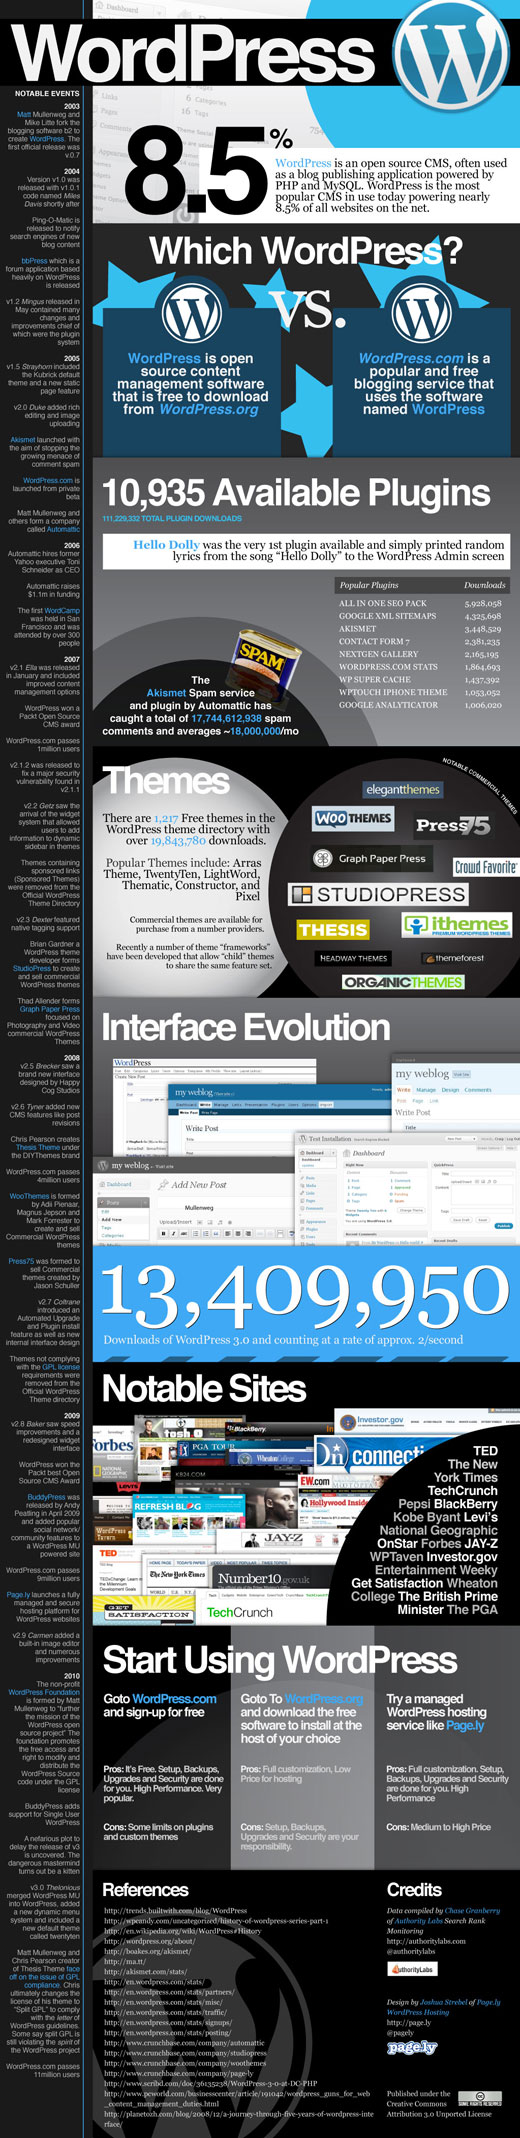 WordPress Infographic - Statistics and Notable Events From 2003 through 2010